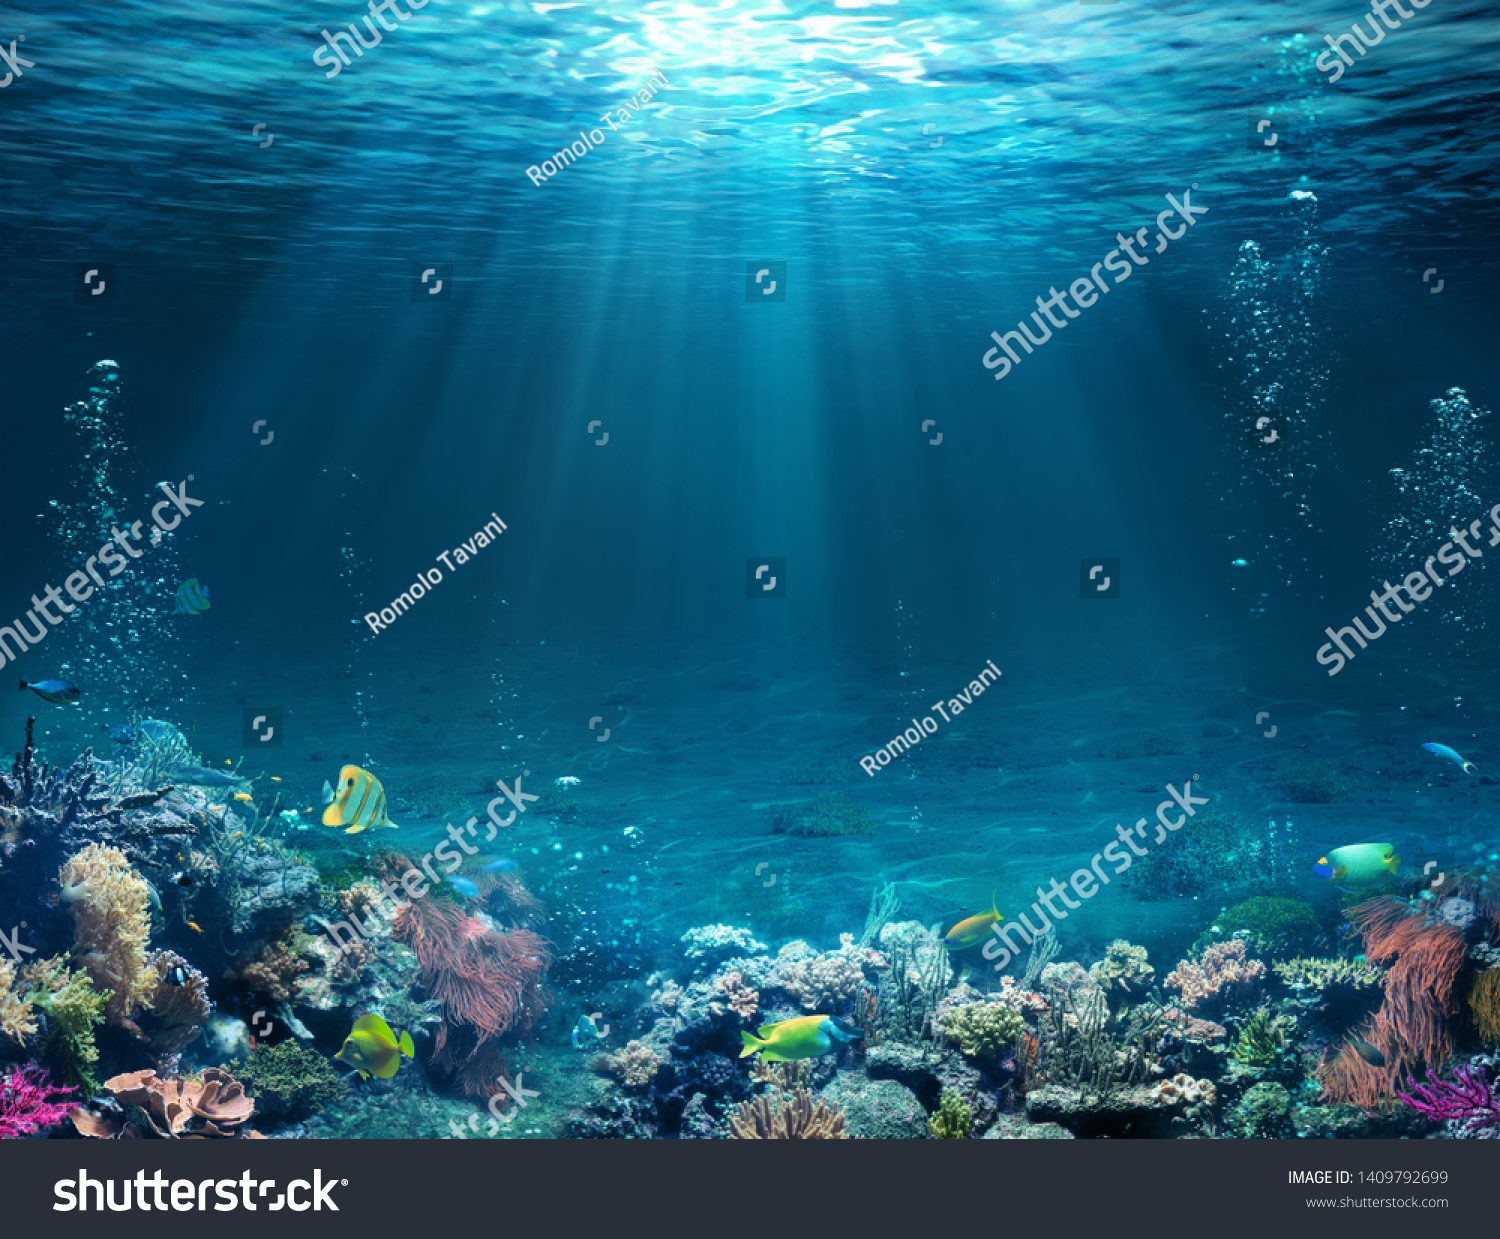 Underwater Scene - Tropical Seabed With Reef And Sunshine
 #1409792699